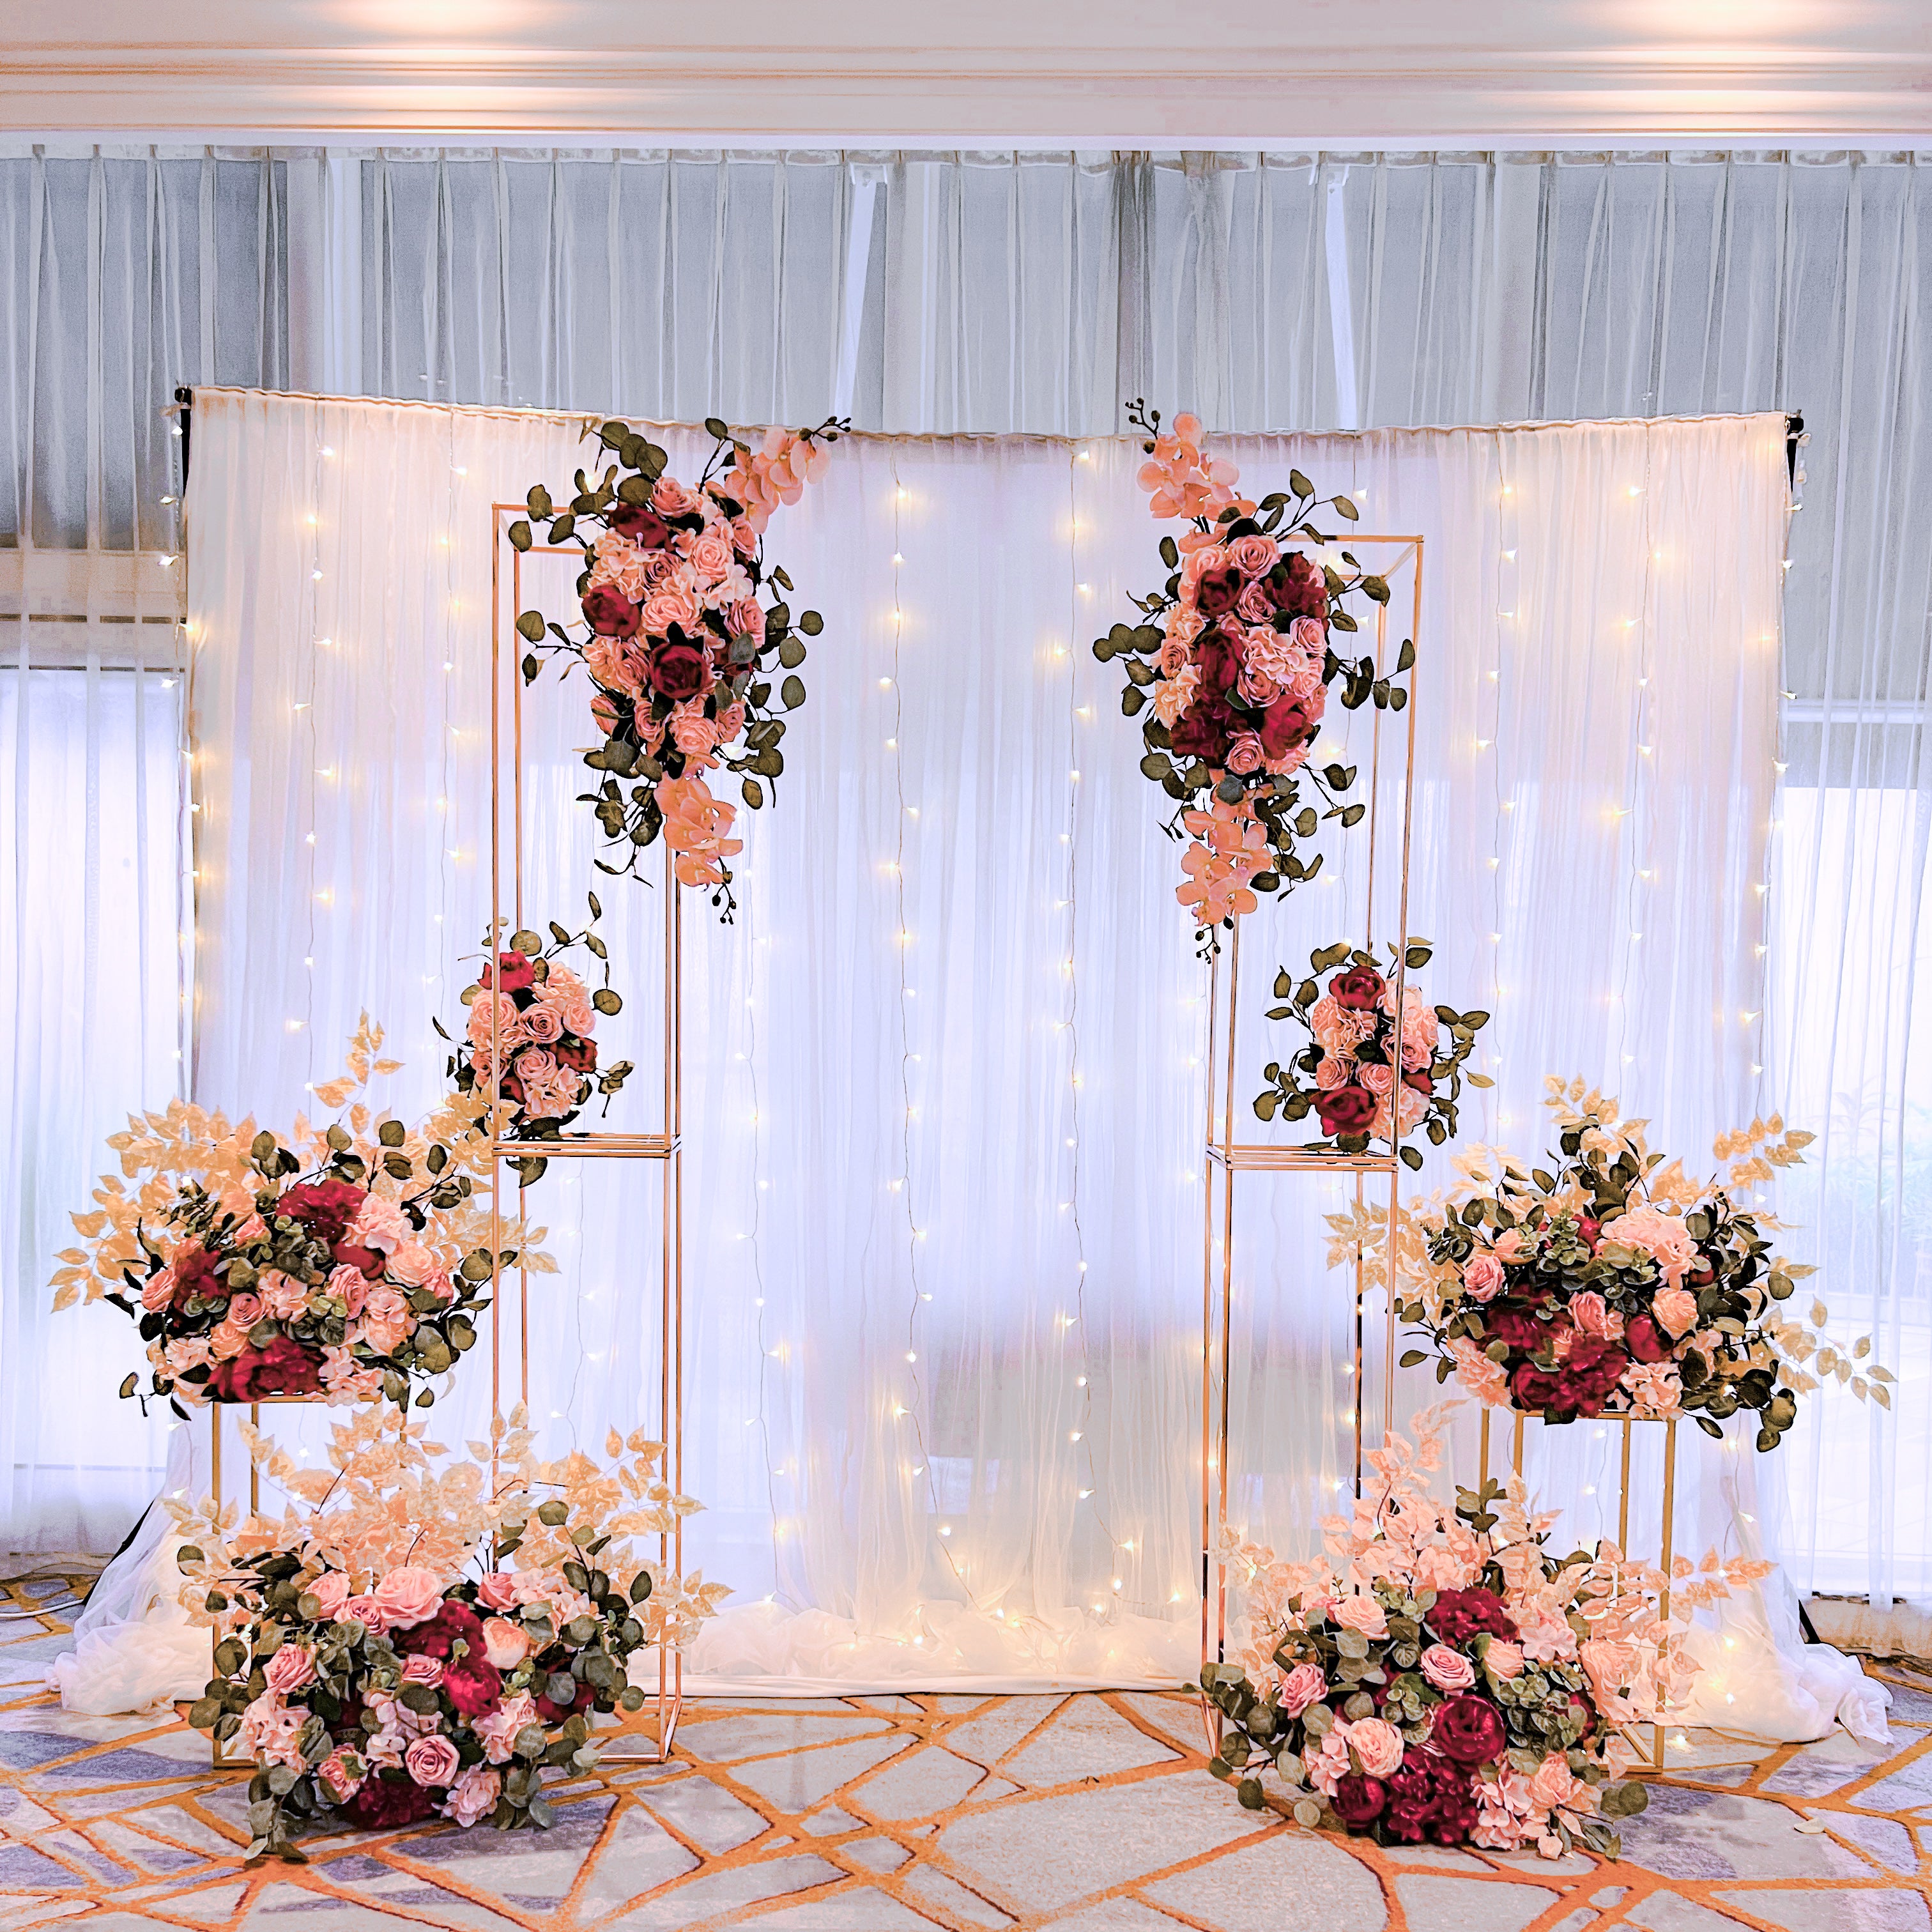 Wedding/ Solemnisation Decor in Singapore - Red & Pink Floral Column Arch w. Fairylights Backdrop suitable for Indoor/Outdoor (Venue: Four Seasons Hotel))